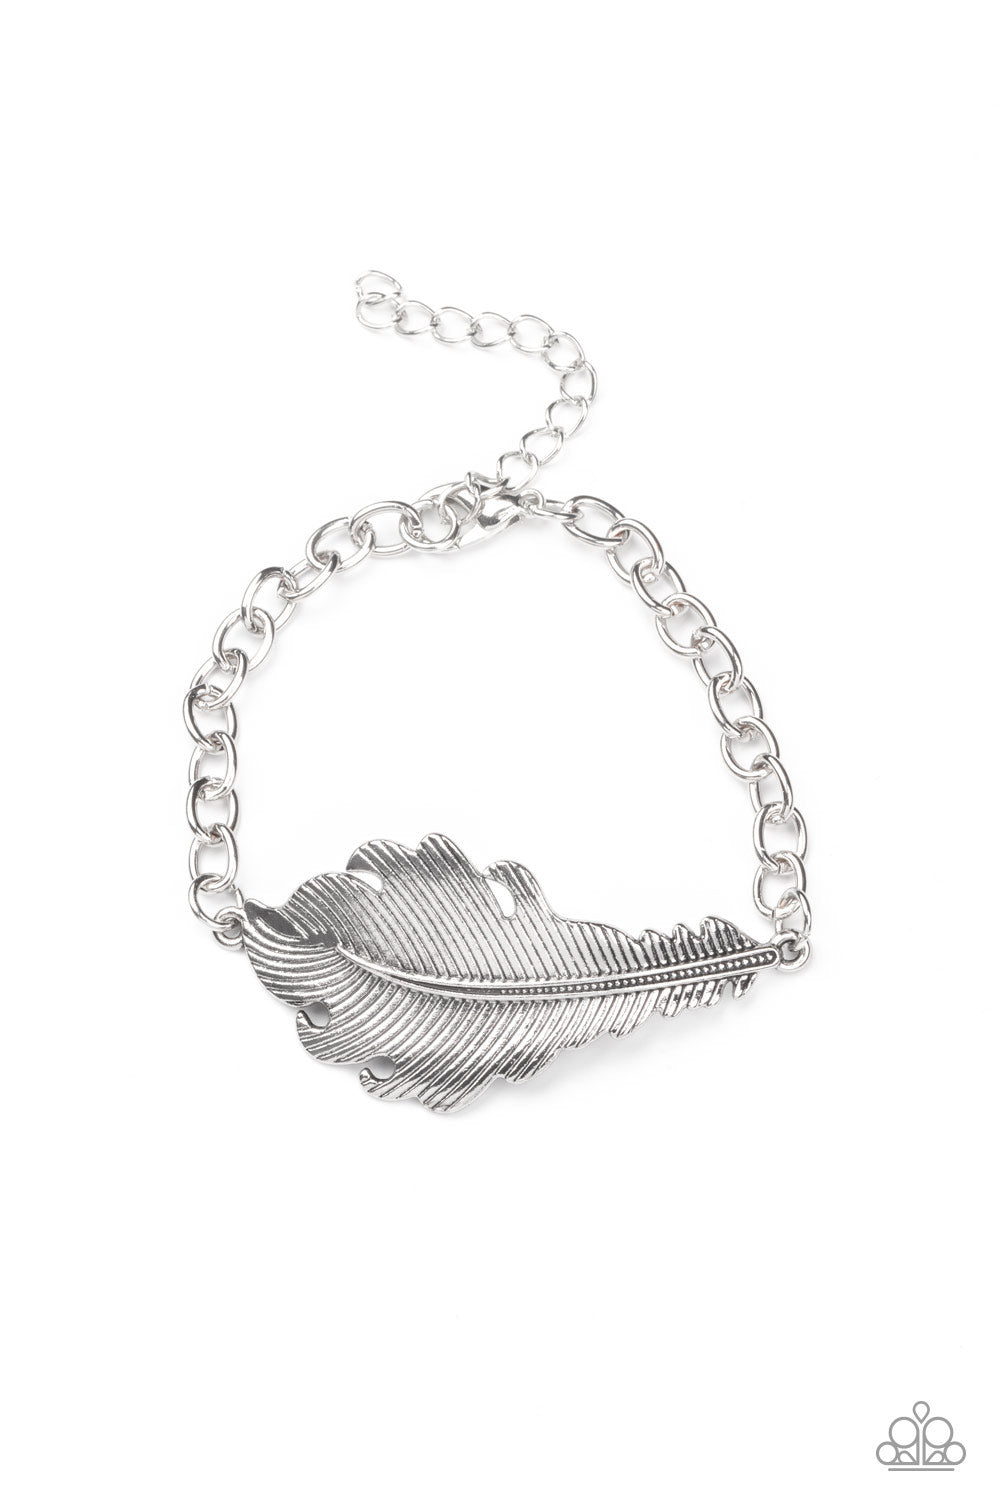 Rustic Roost - Silver - Spiffy Chick Jewelry